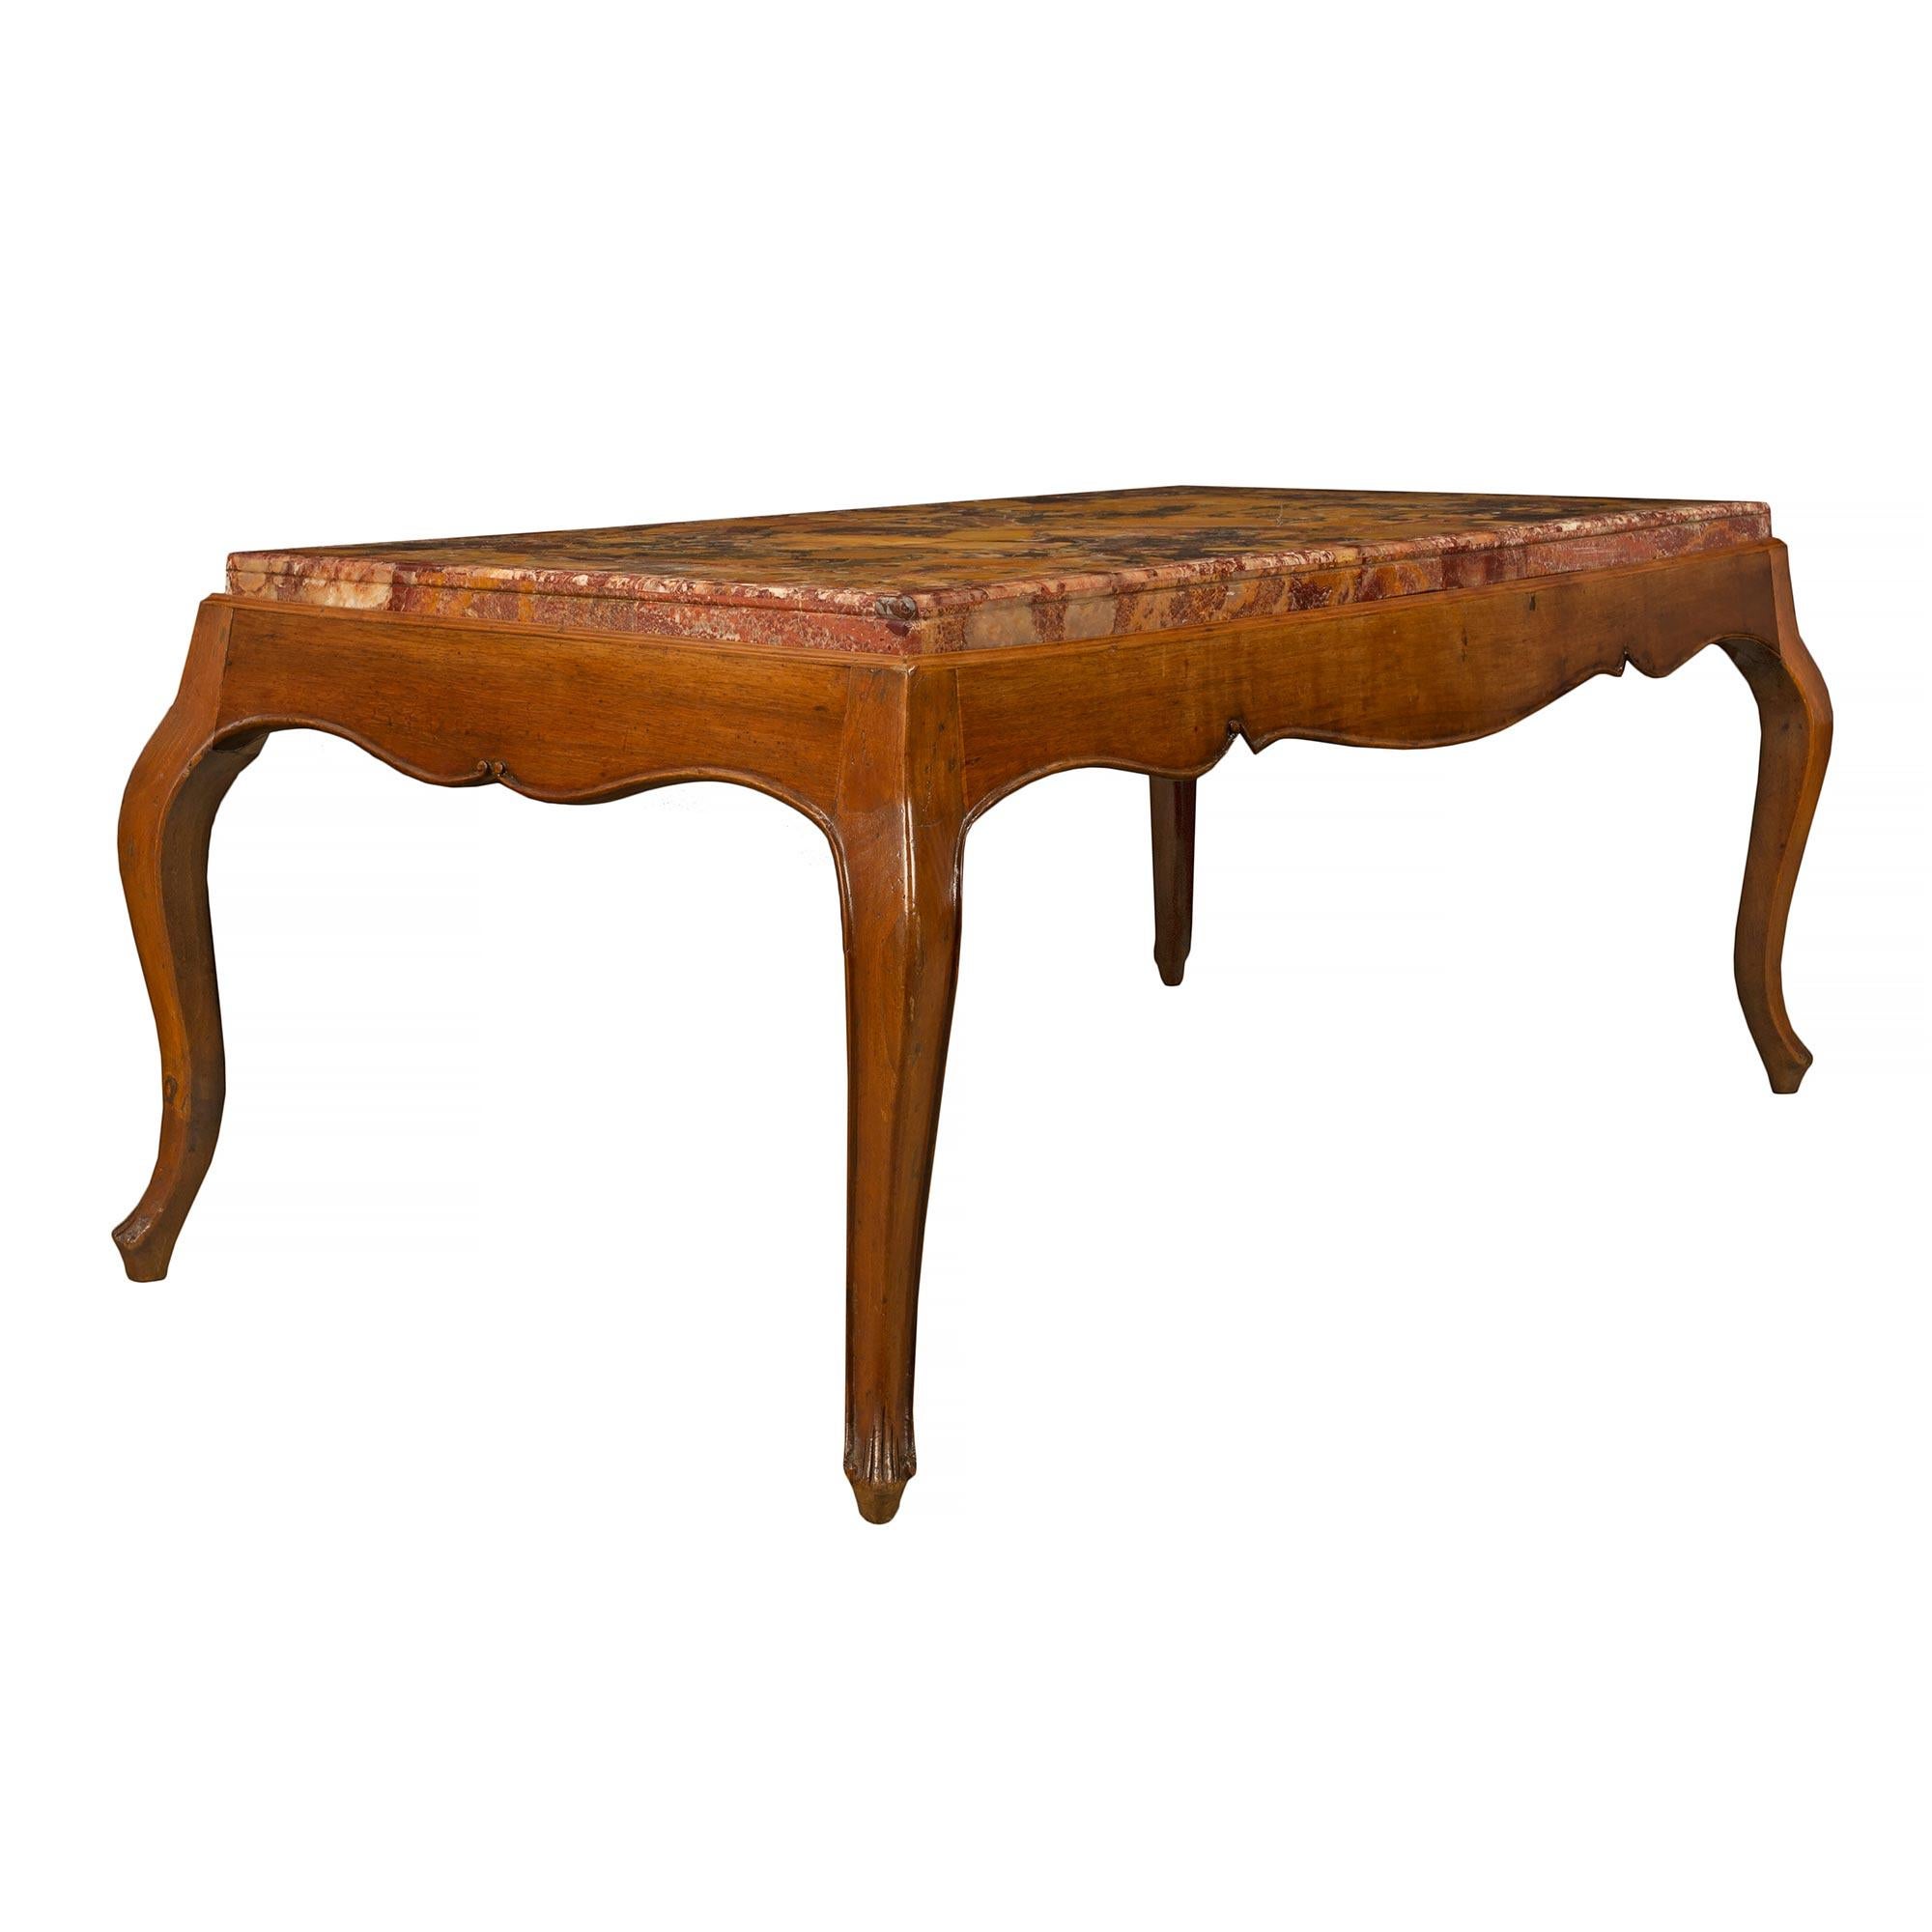 Italian 19th Century Louis XV Style Walnut and Marble Coffee Table For Sale 1